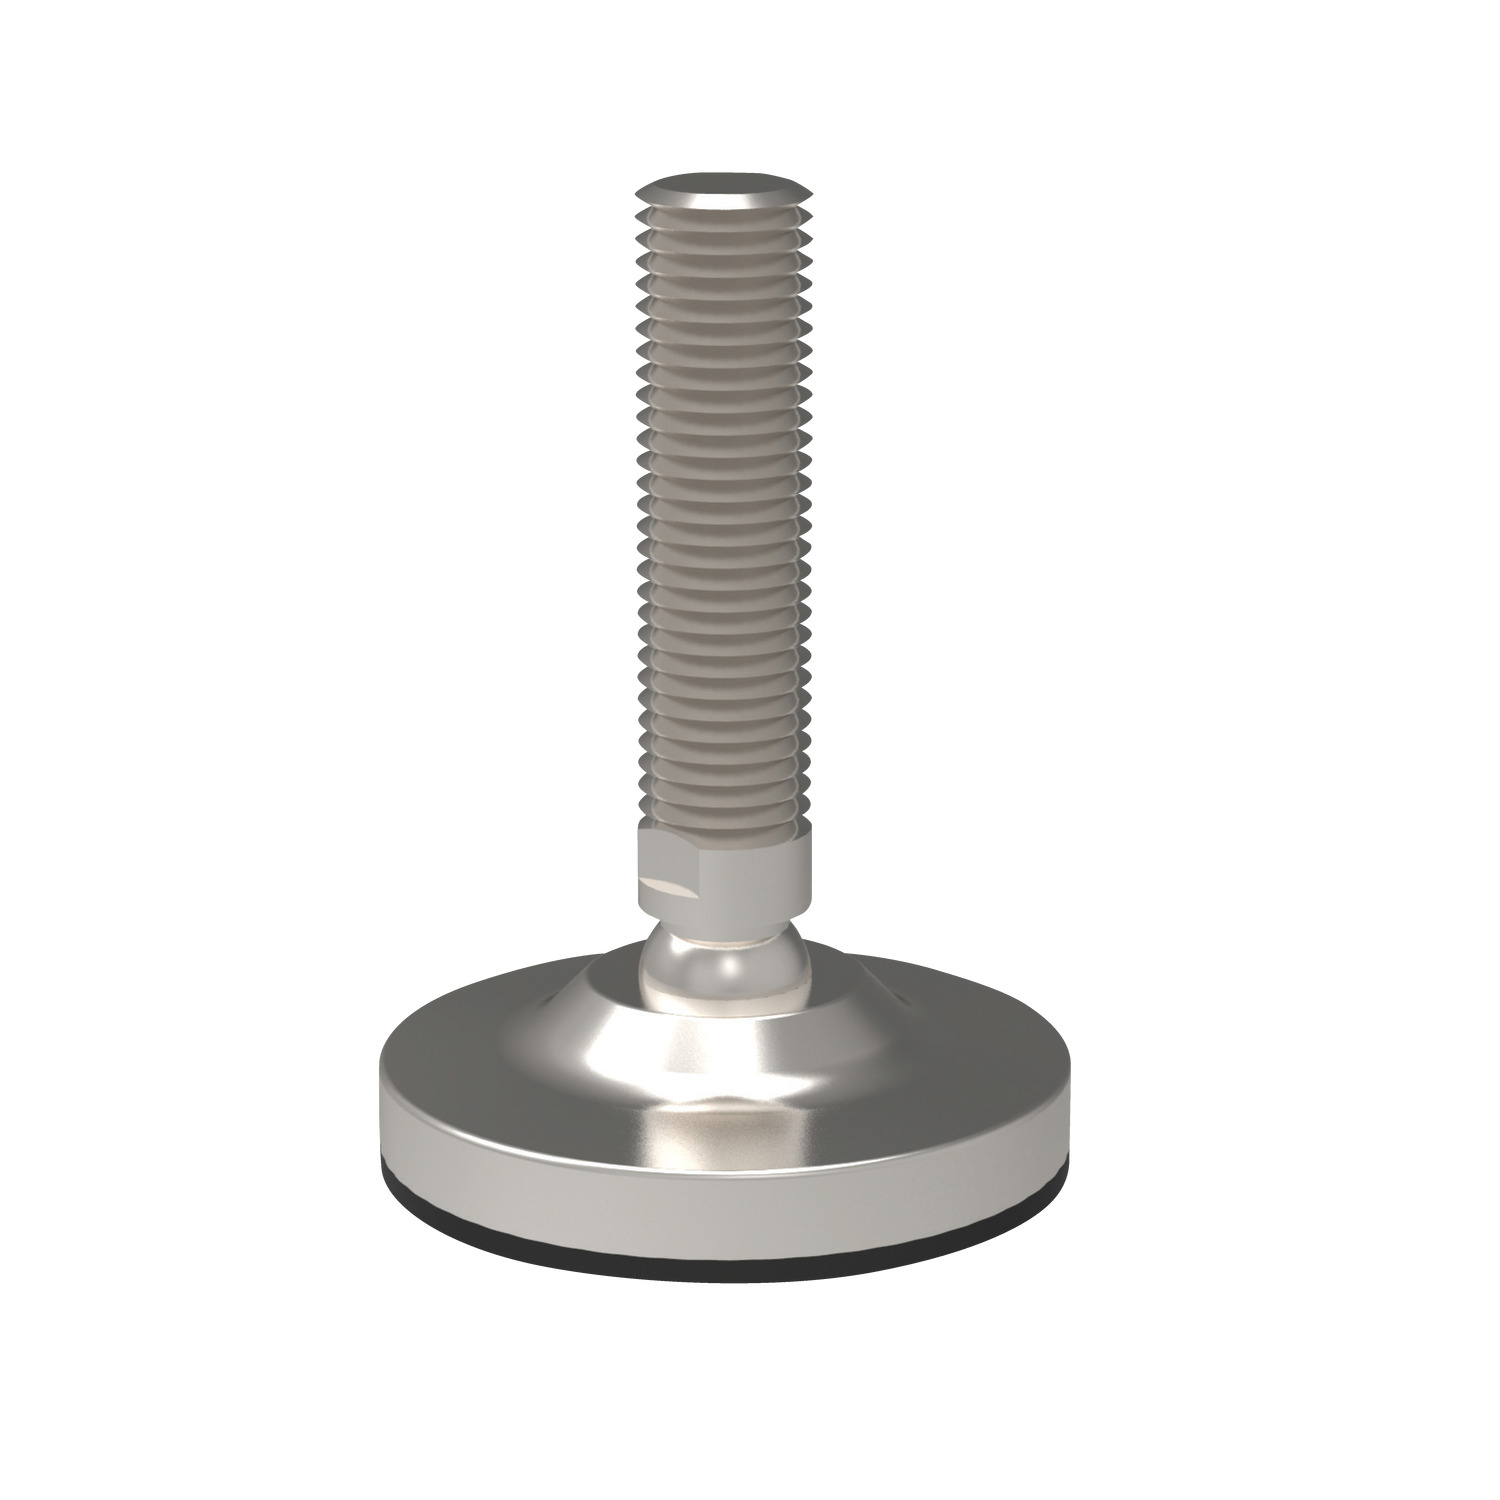 Mini Levelling Feet Levelling mounts are used for machines that need to be level. Loads of up to 10 tonnes per mount and are available in steel or stainless steel.